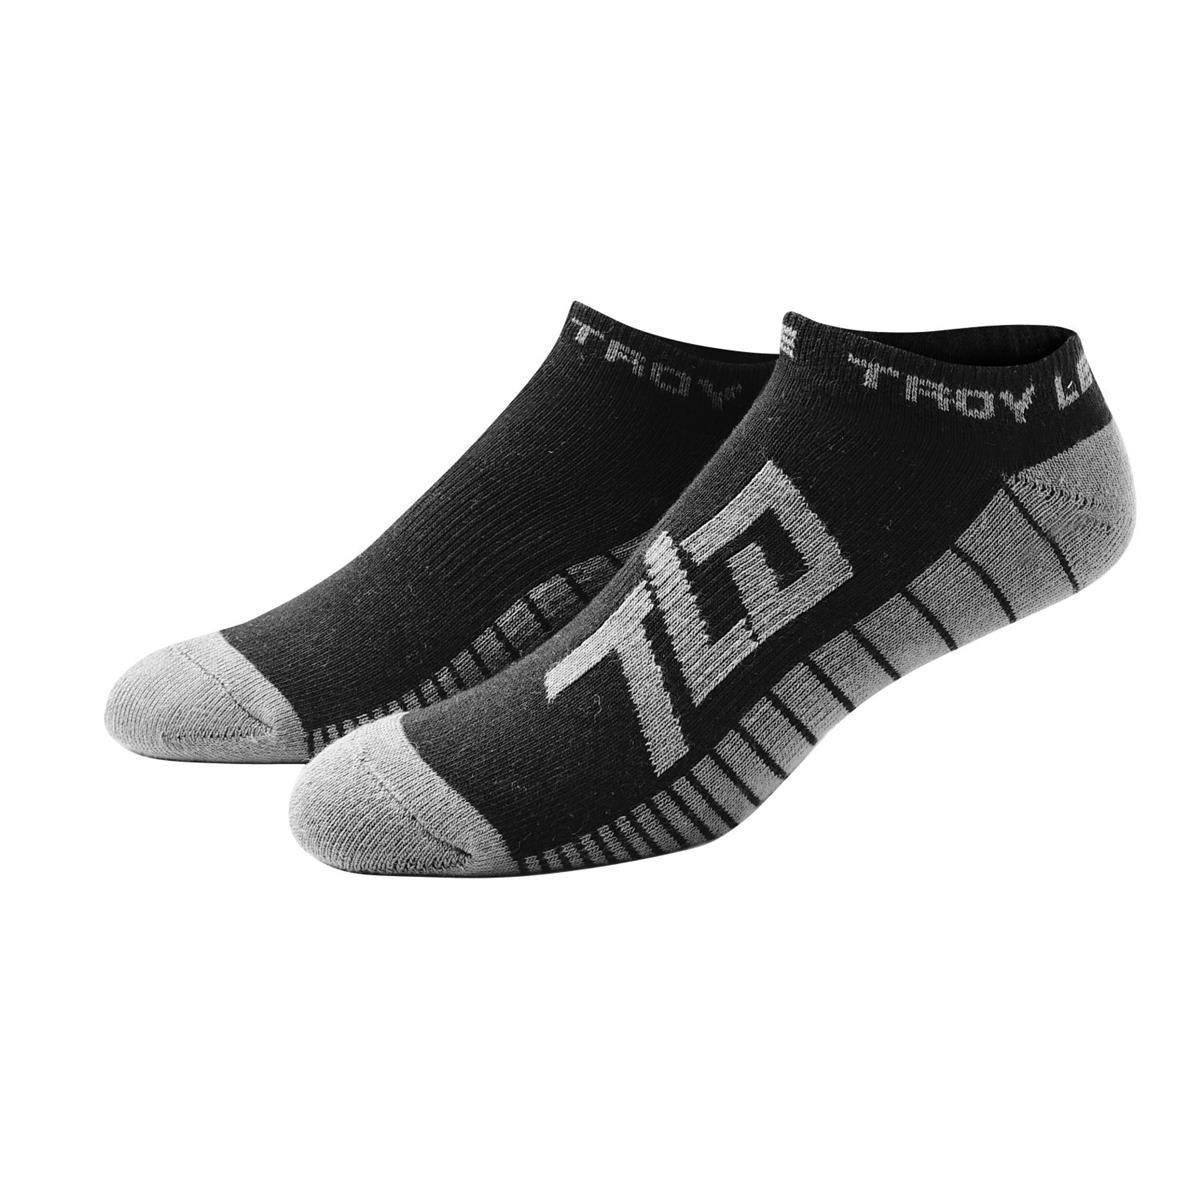 Troy Lee Designs Chaussettes Factory Ankle Black, 3 Pack